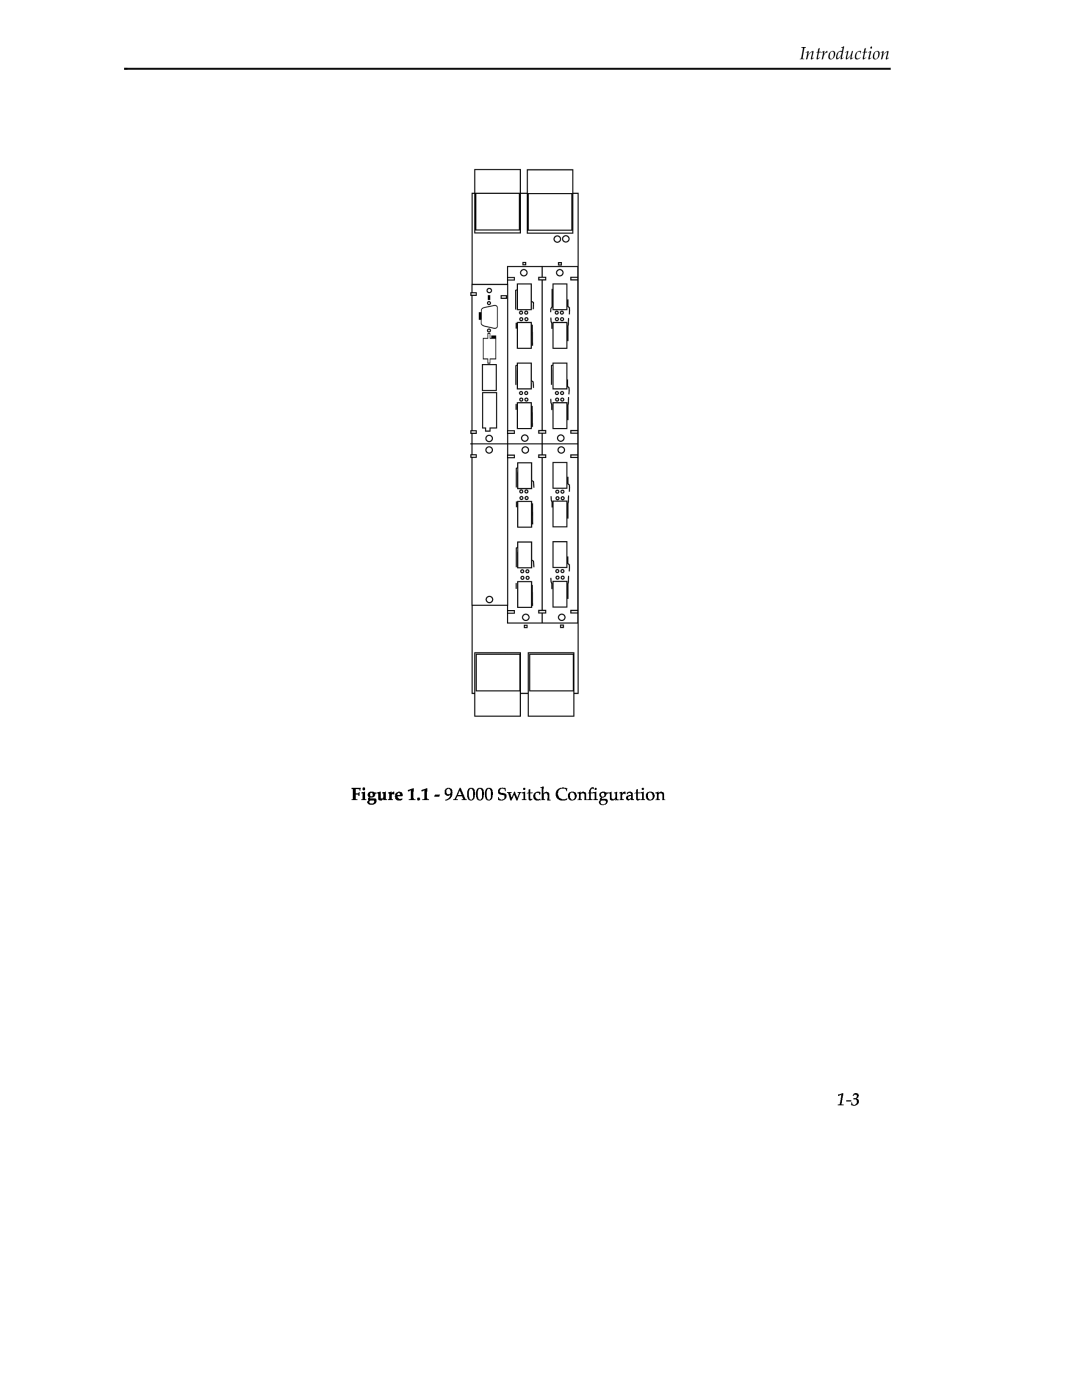 Cabletron Systems manual Introduction, 1 - 9A000 Switch Conﬁguration 